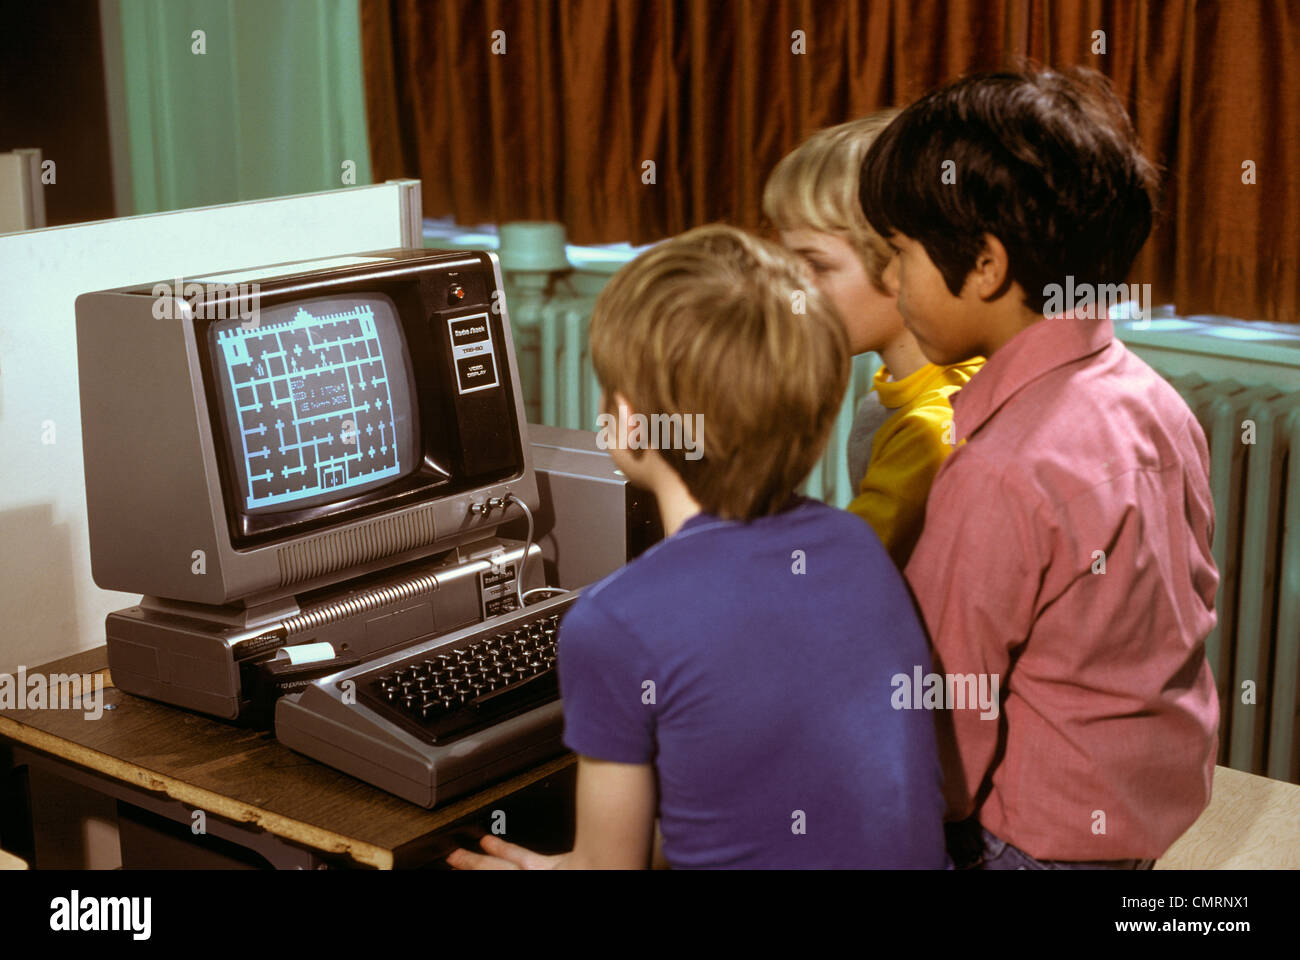 1980s 3 ELEMENTARY SCHOOL BOYS OPERATING EARLY RADIO SHACK TRS80 COMPUTER PLAYING GAME Stock Photo